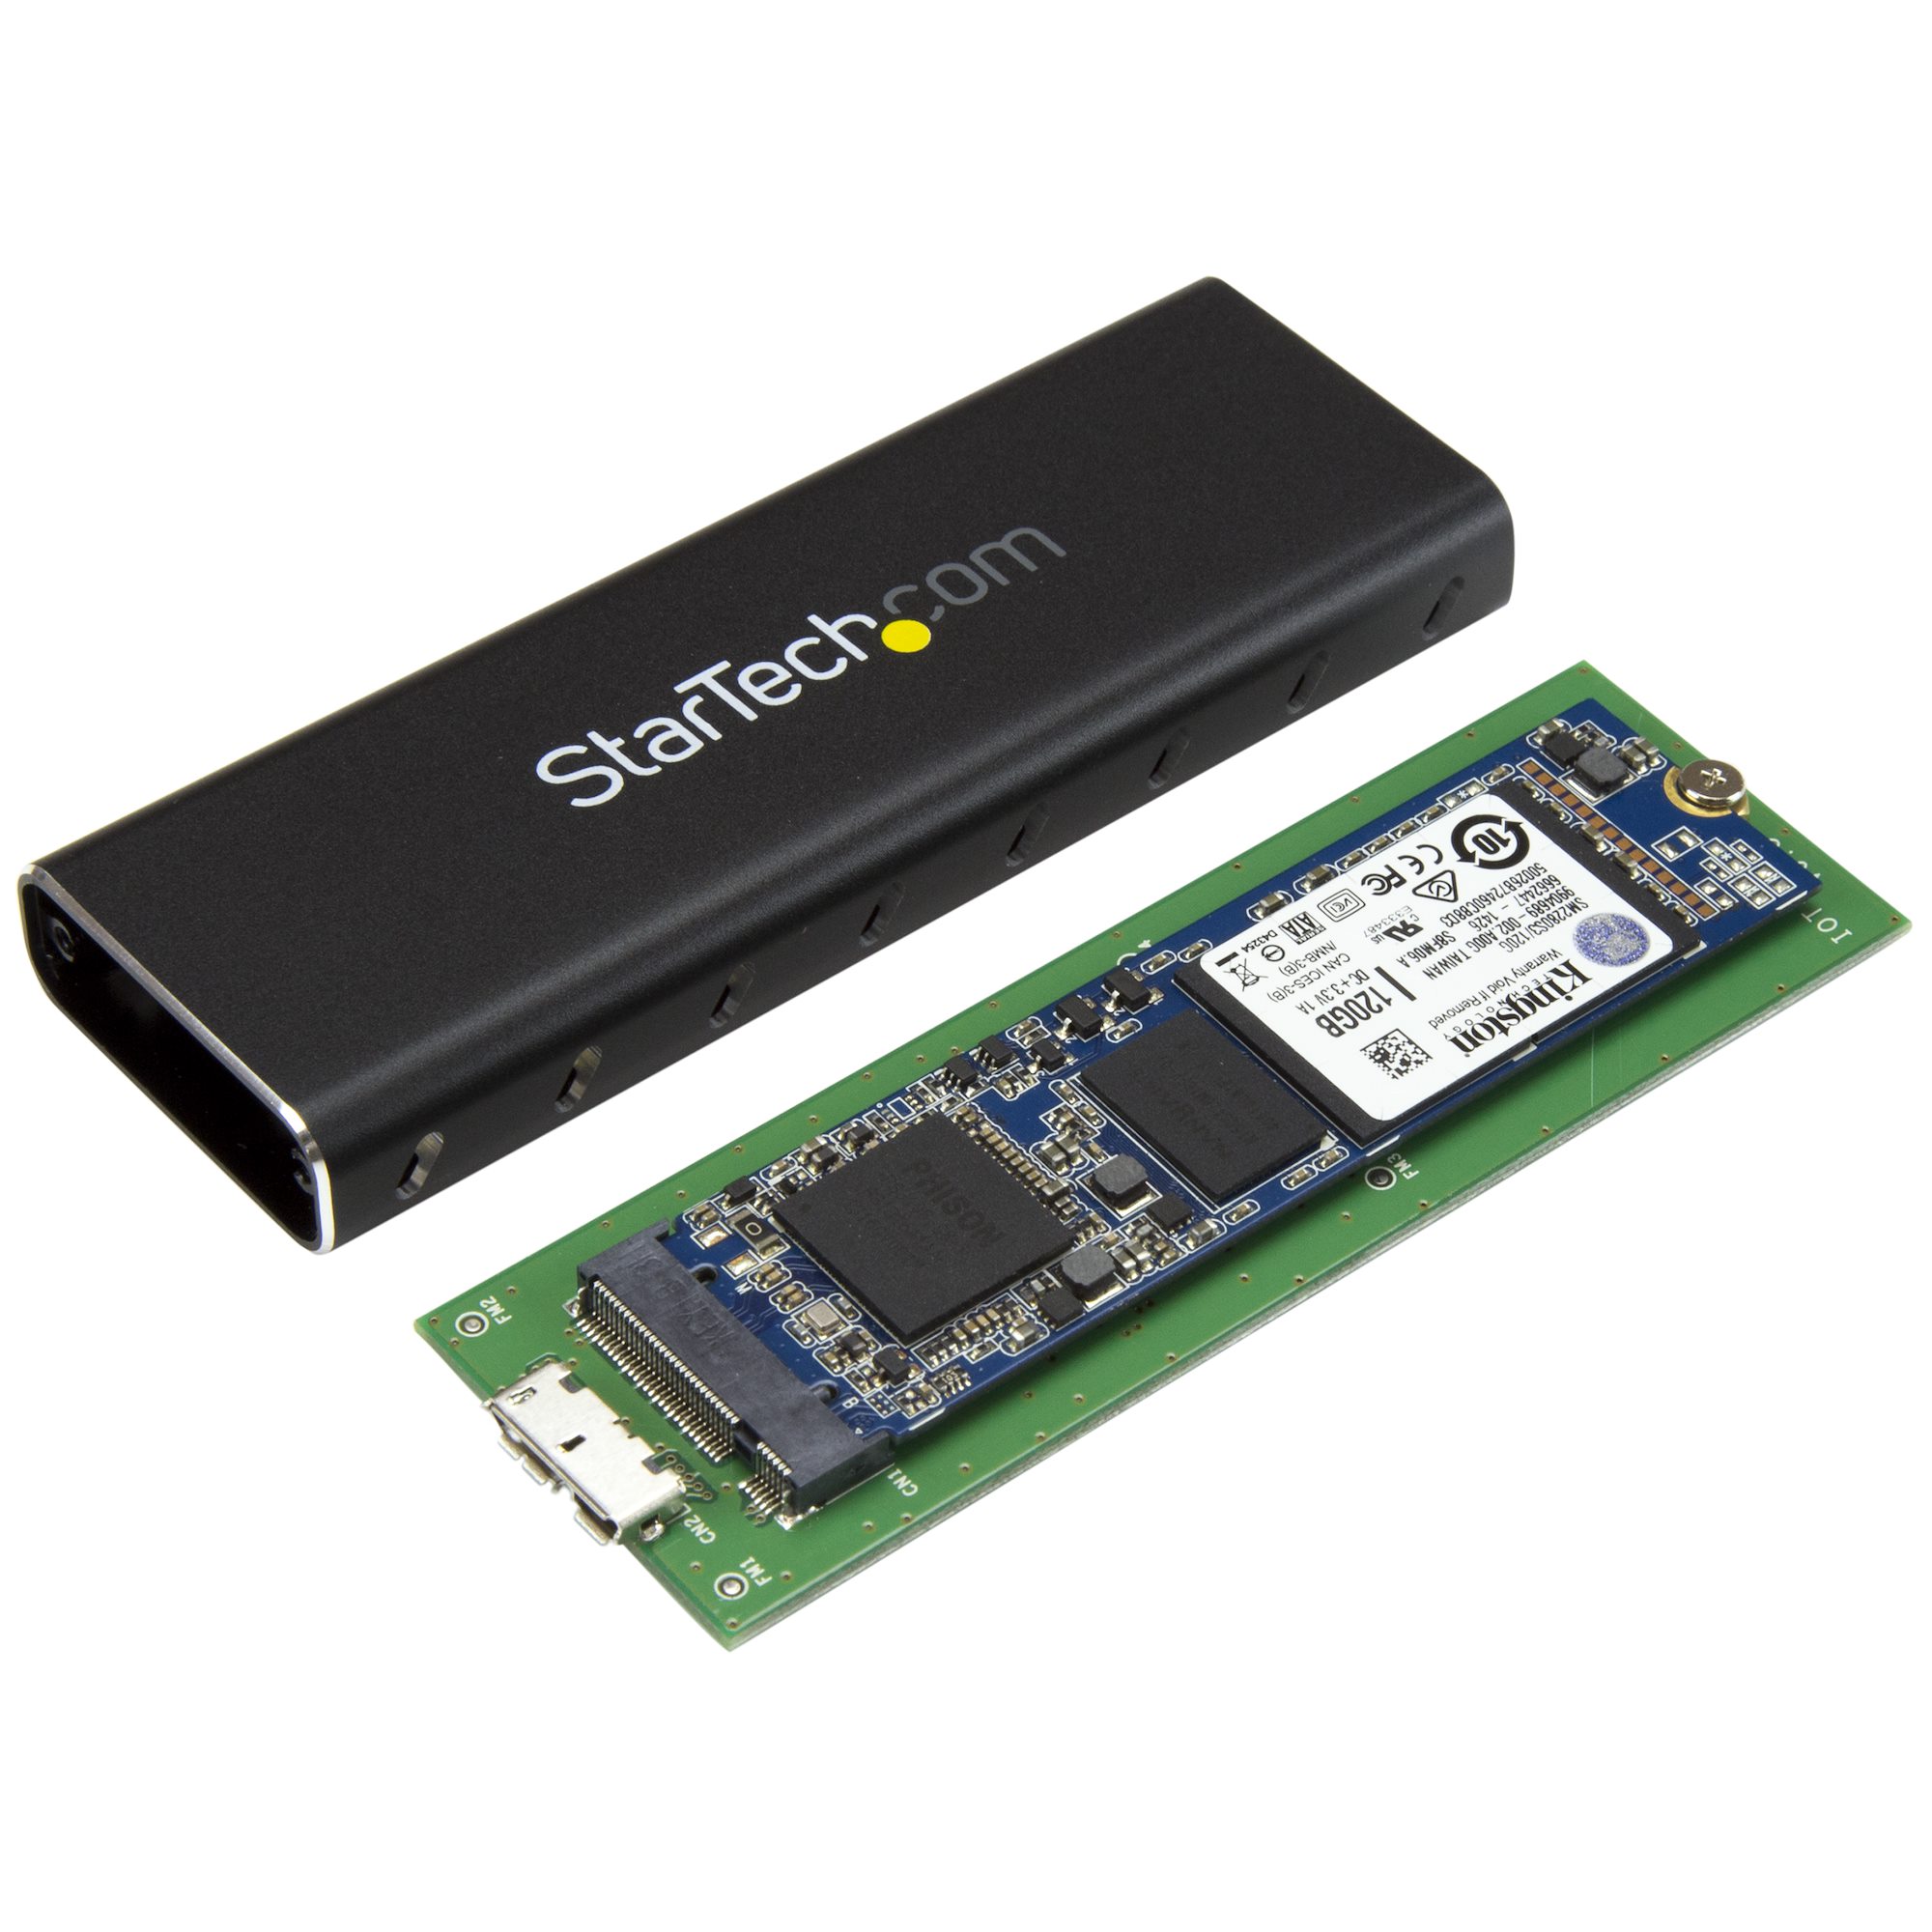 M.2 SSD Enclosure for M.2 SATA SSDs - USB 3.0 (5Gbps) with UASP